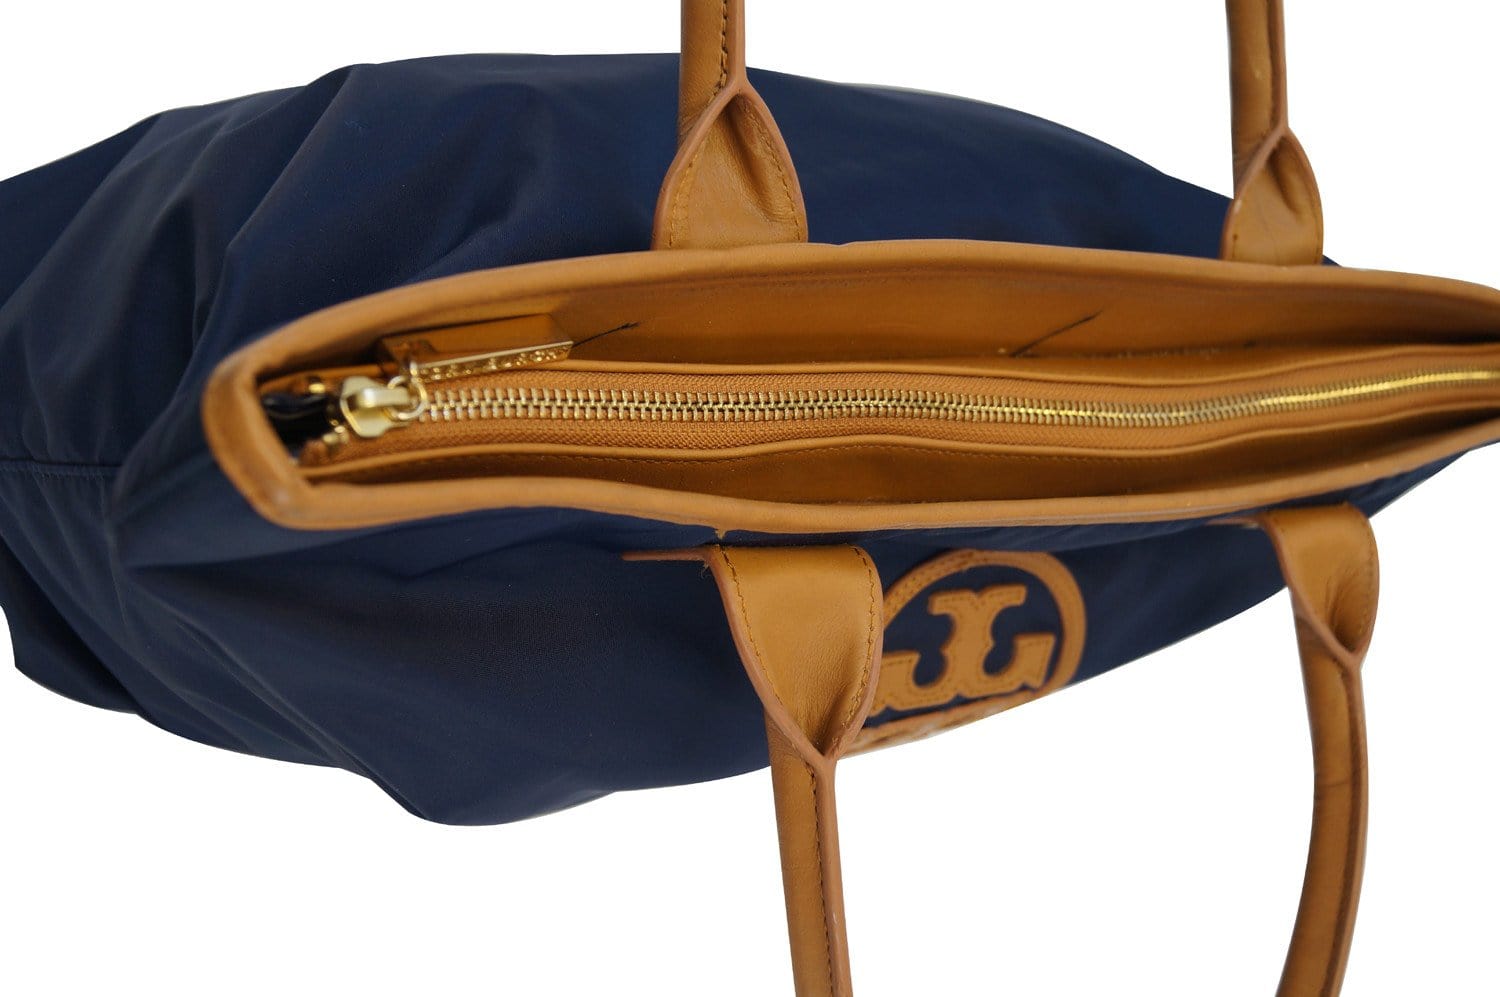 Tory Burch Orange/Blue Nylon and Leather Tote Tory Burch